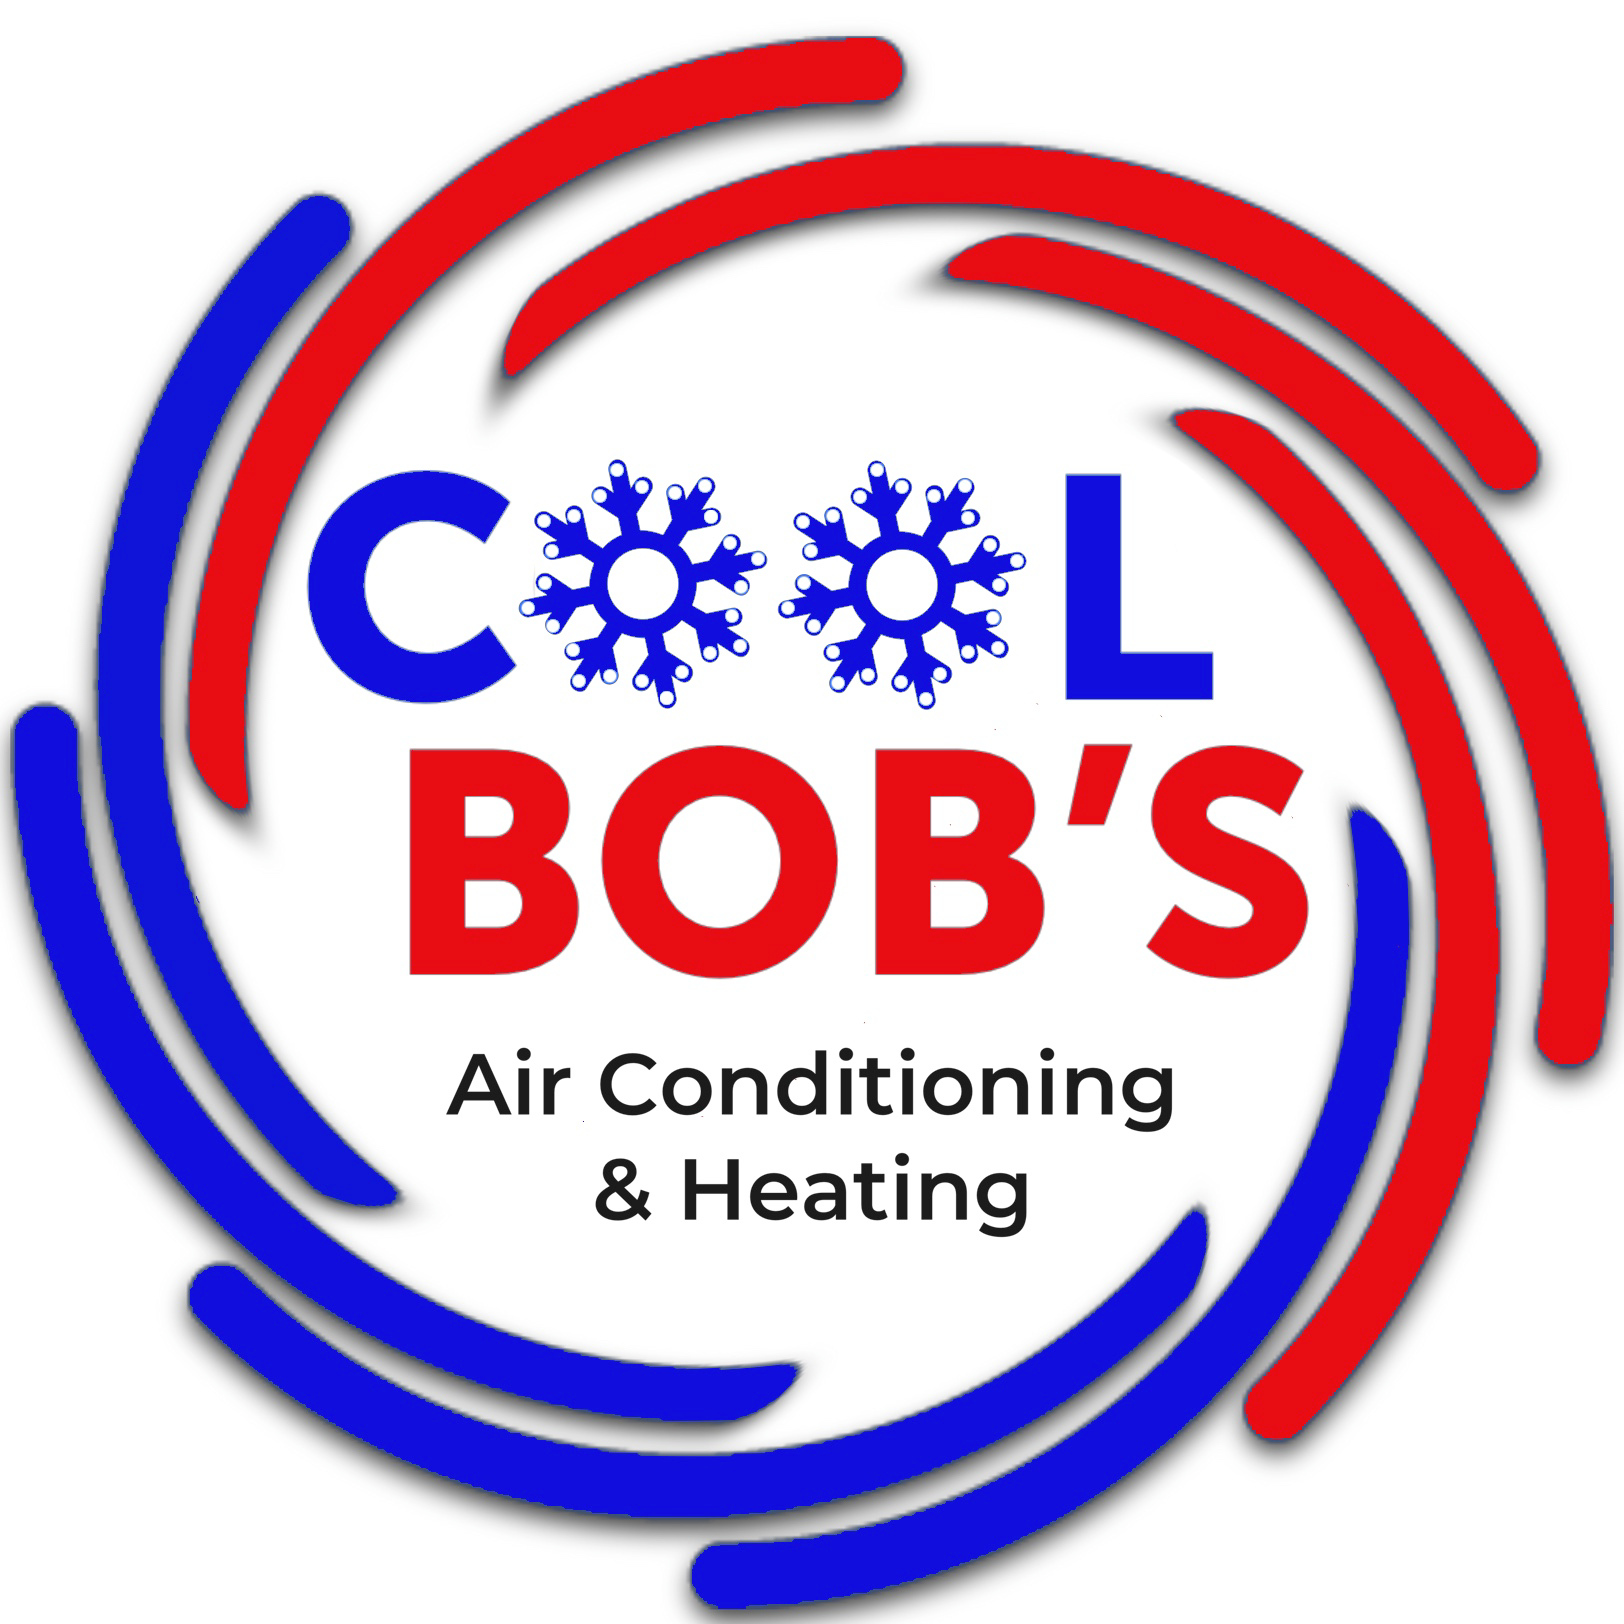 Cool Bob's Air Conditioning and Heating 72354 Vine St, Abita Springs Louisiana 70420